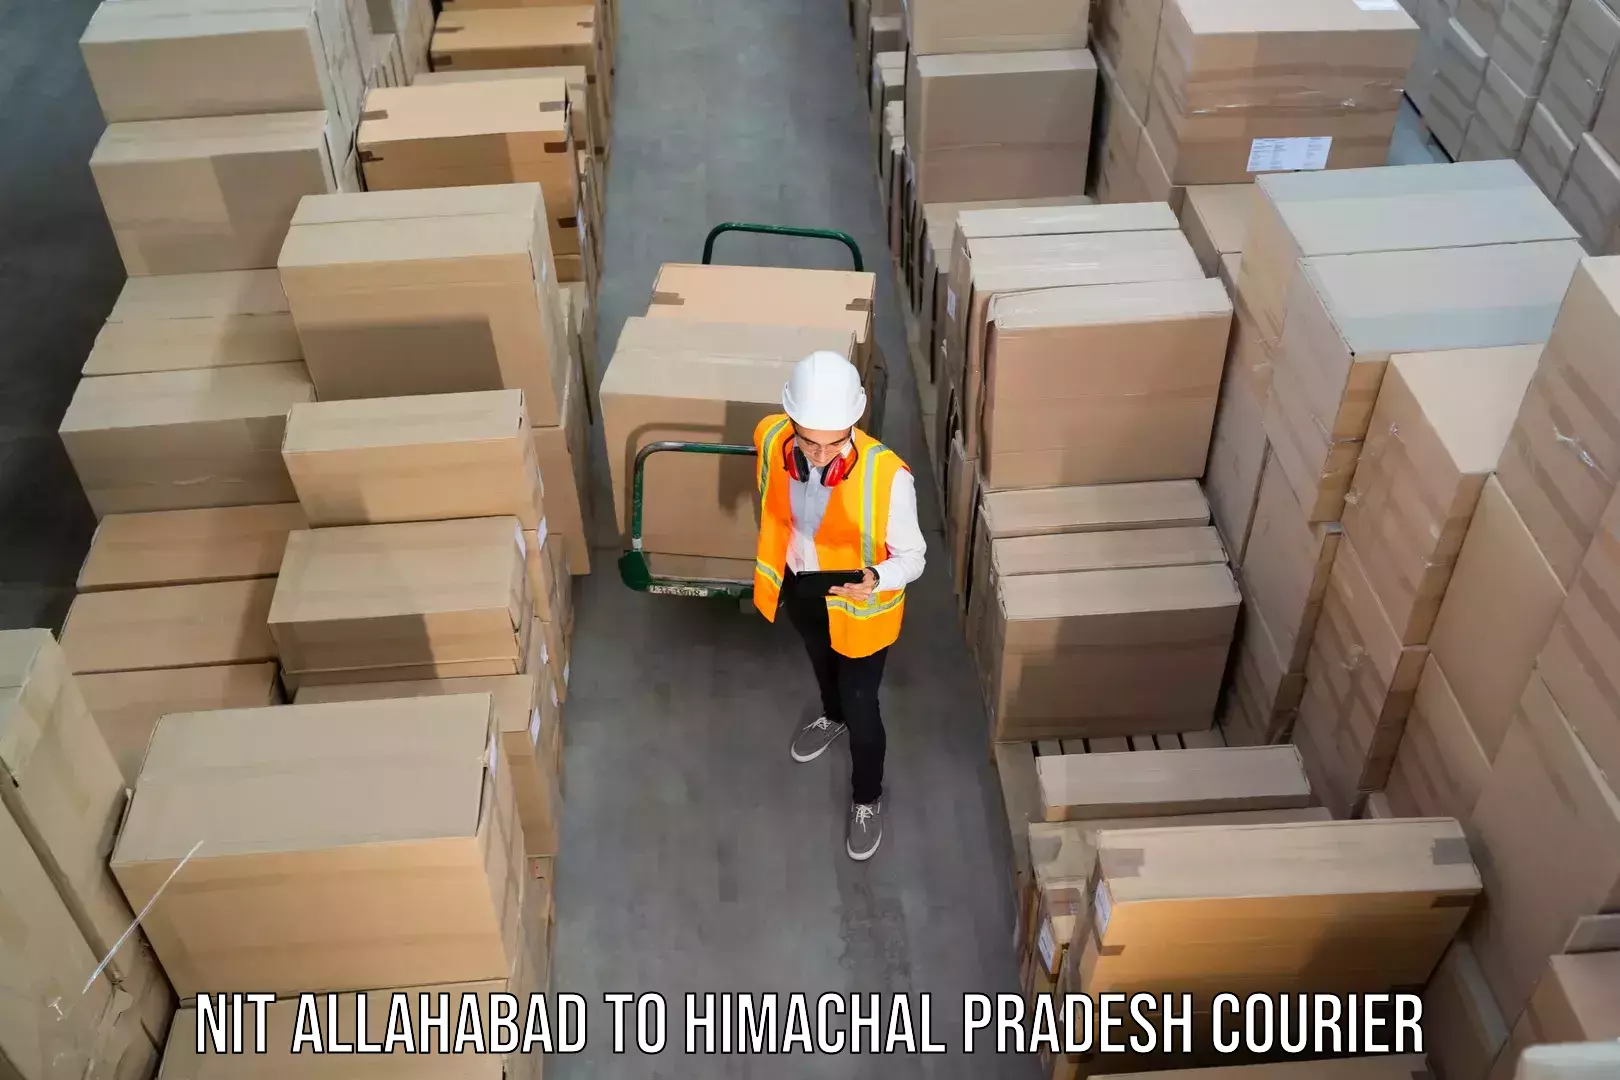 24-hour courier service NIT Allahabad to Dheera